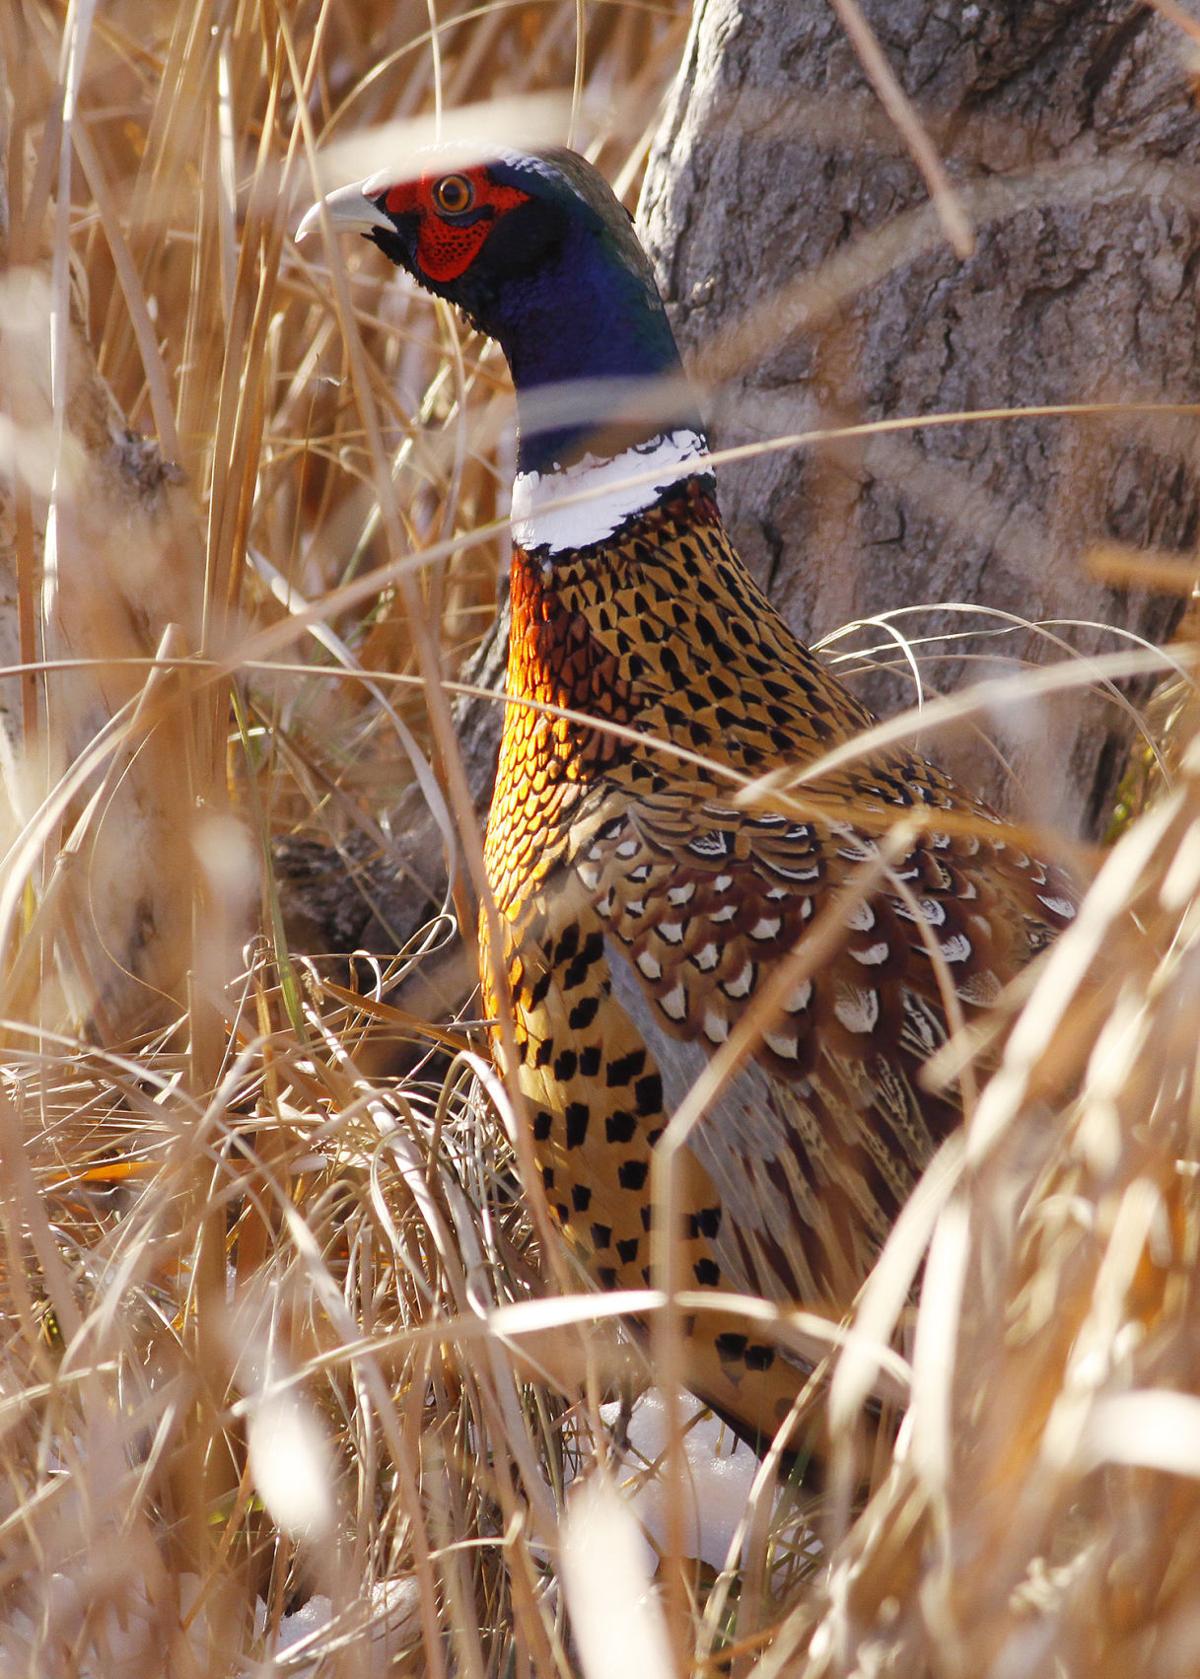 South Dakota drought could affect pheasant population Local